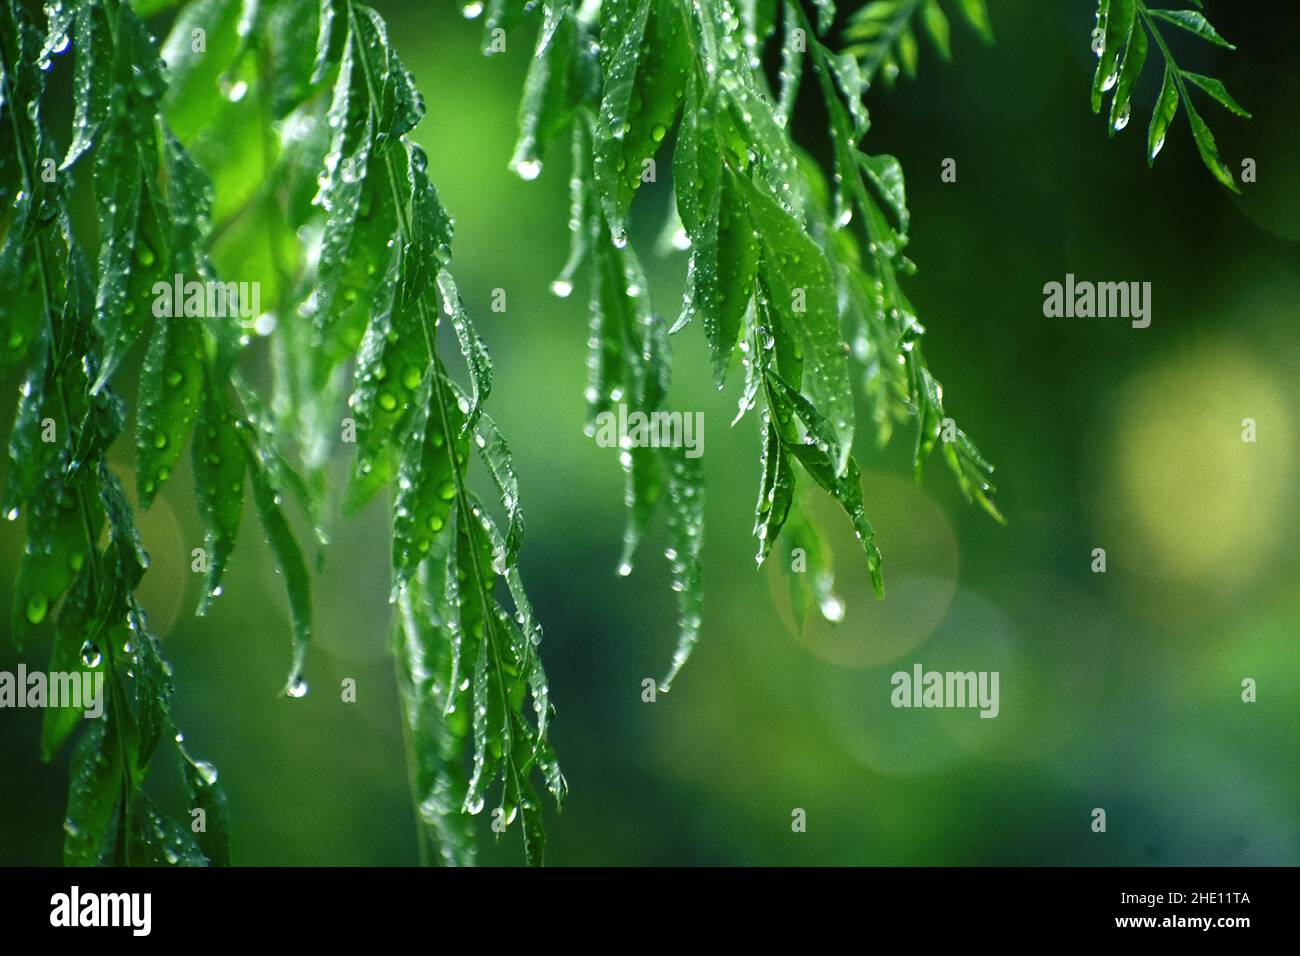 Closeup shot of rain drops on the green leaves of a tree on a blurred background Stock Photo